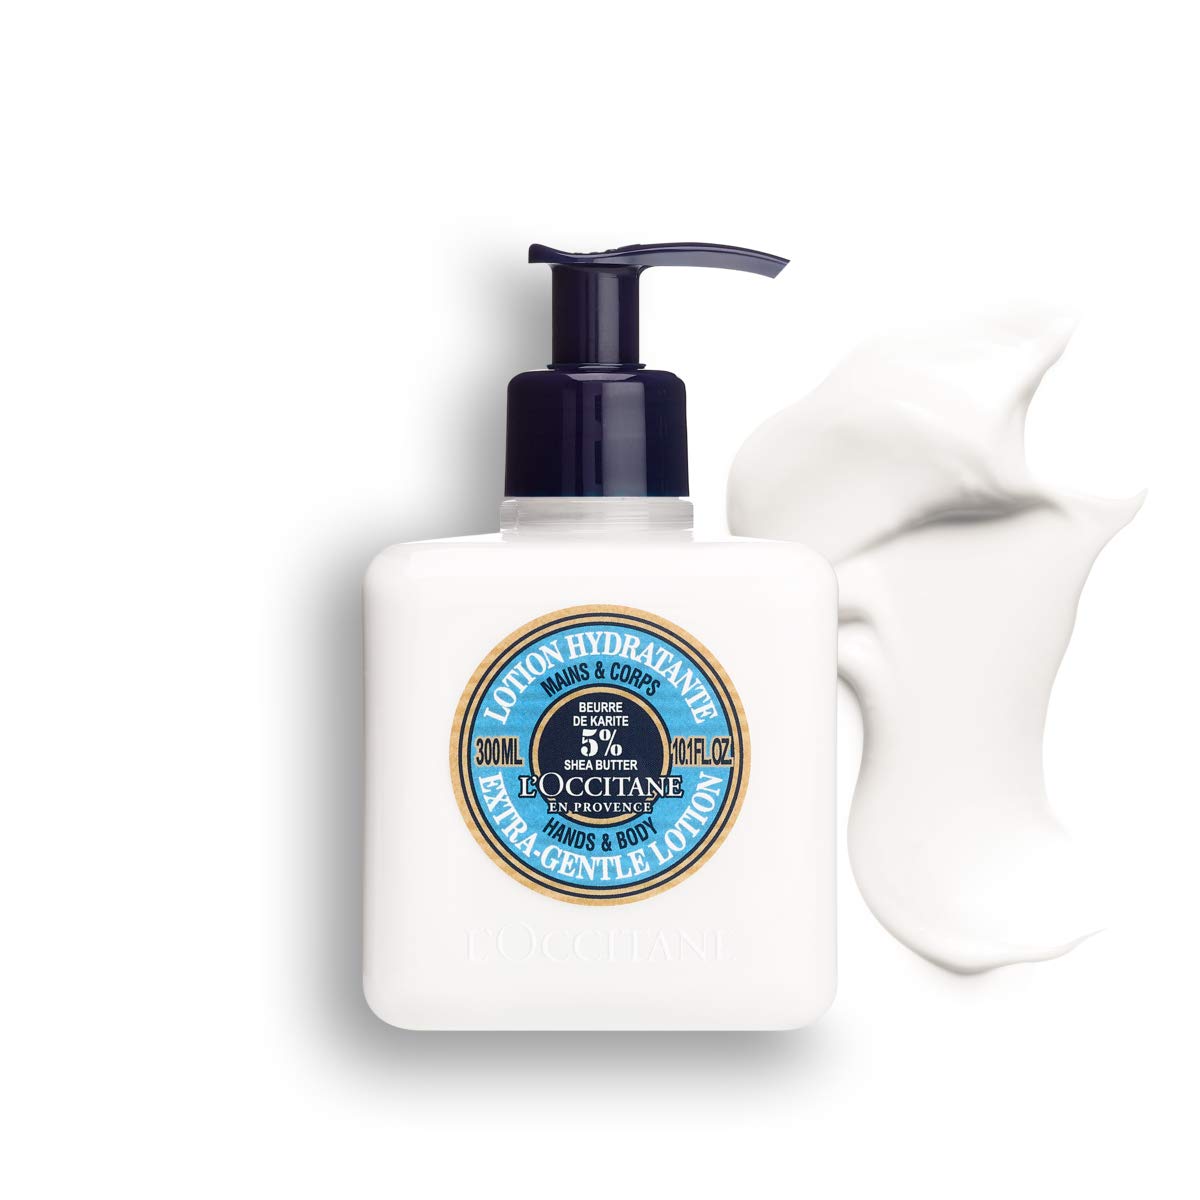 L'Occitane Extra-Gentle Lotion: Moisturizing, Comfort Skin, Fast-Absorbing Lotion, With 5% Organic Shea Butter, Fresh Scent, Vegan